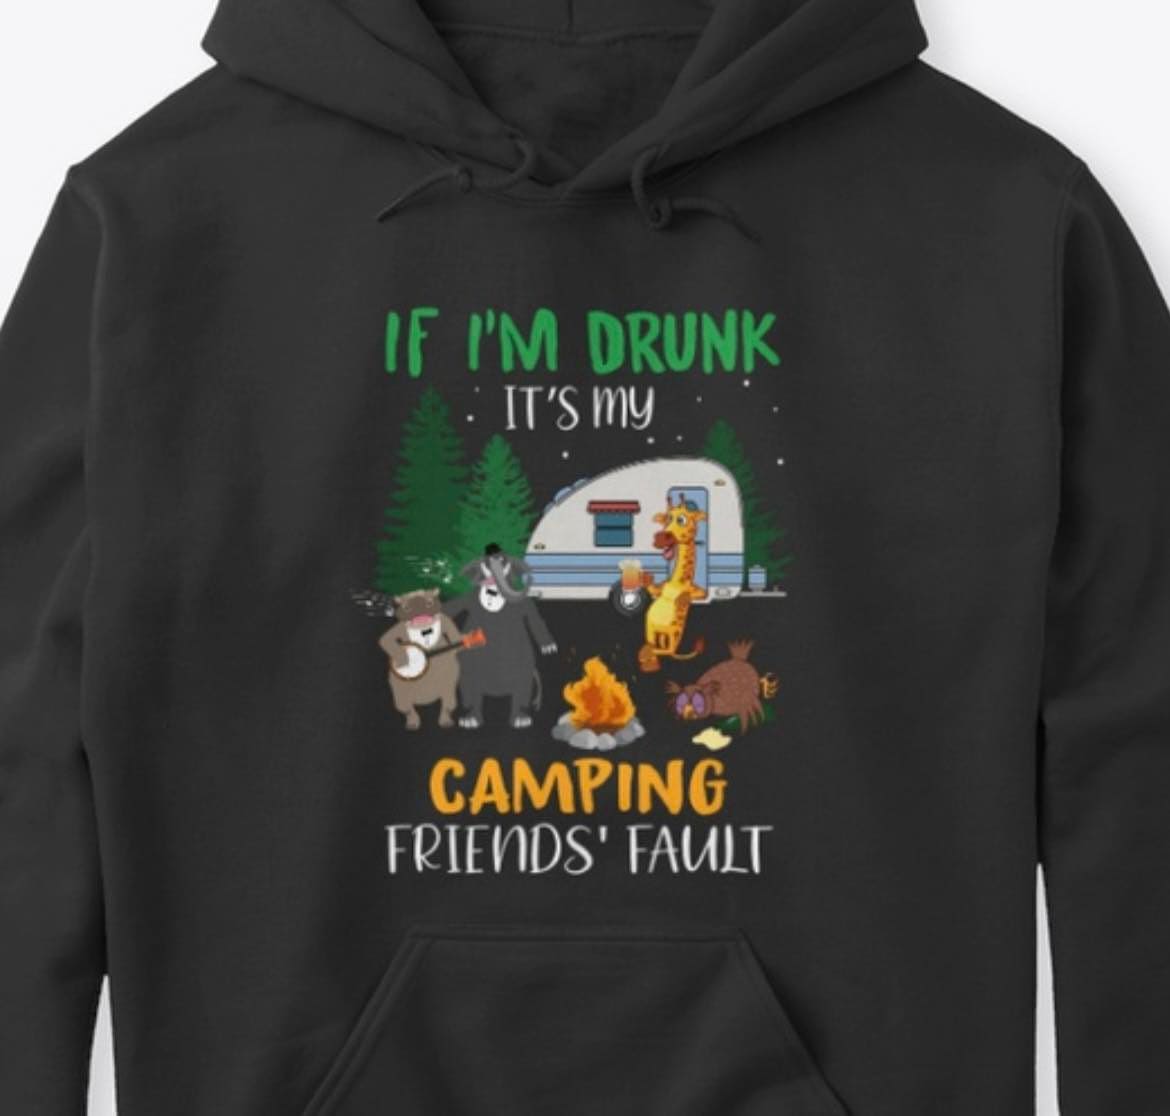 If I'm drunk it's my camping friends' fault - Animal go camping, camping in the forestIf I'm drunk it's my camping friends' fault - Animal go camping, camping in the forest